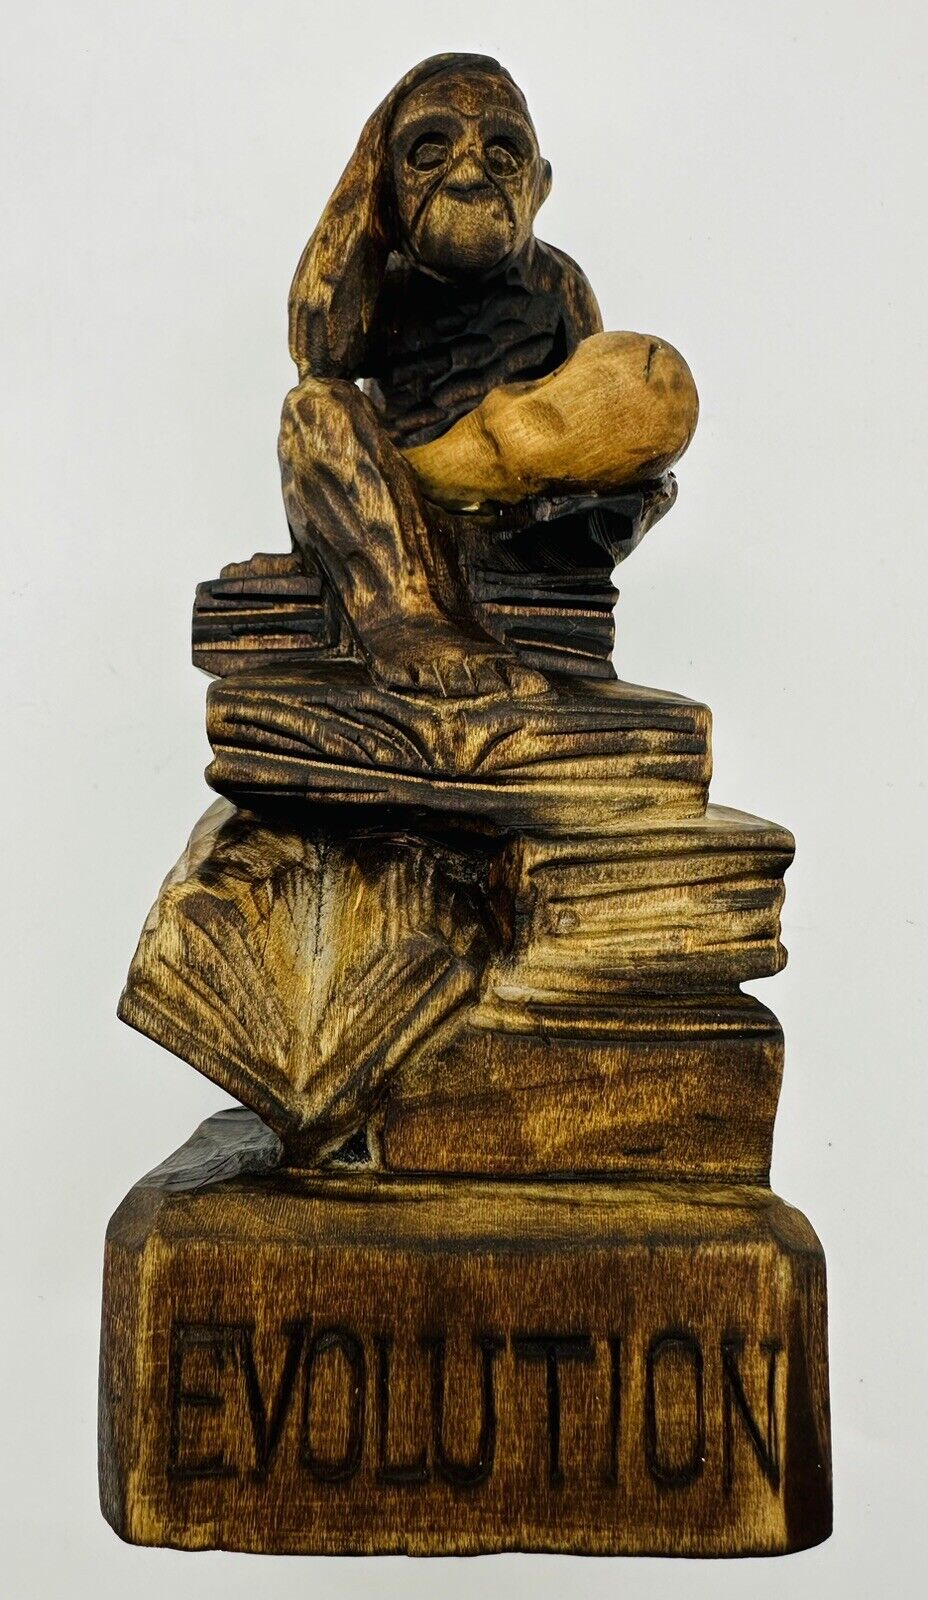 Old Carved Wood Darwin Evolution Thinking Monkey w/ Skull on Books Sculpture